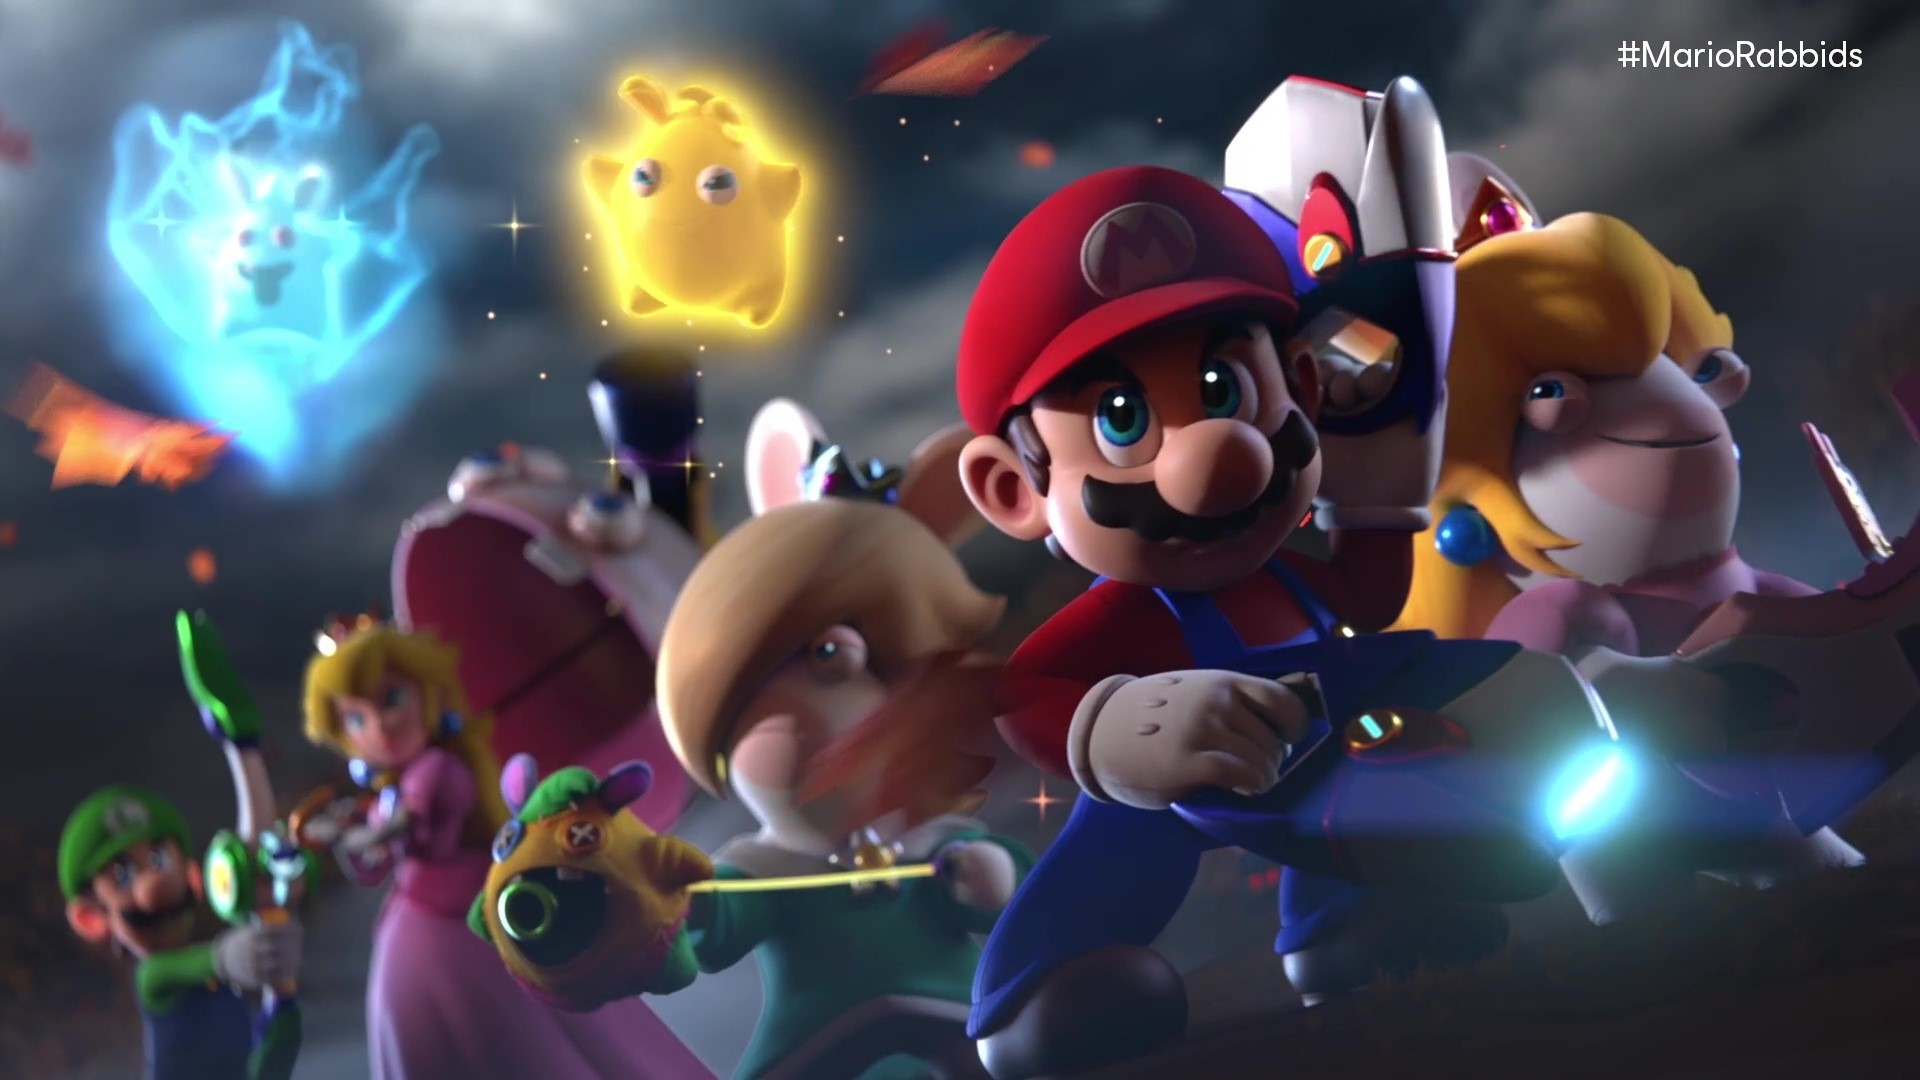 Mario and the crew holding blasters